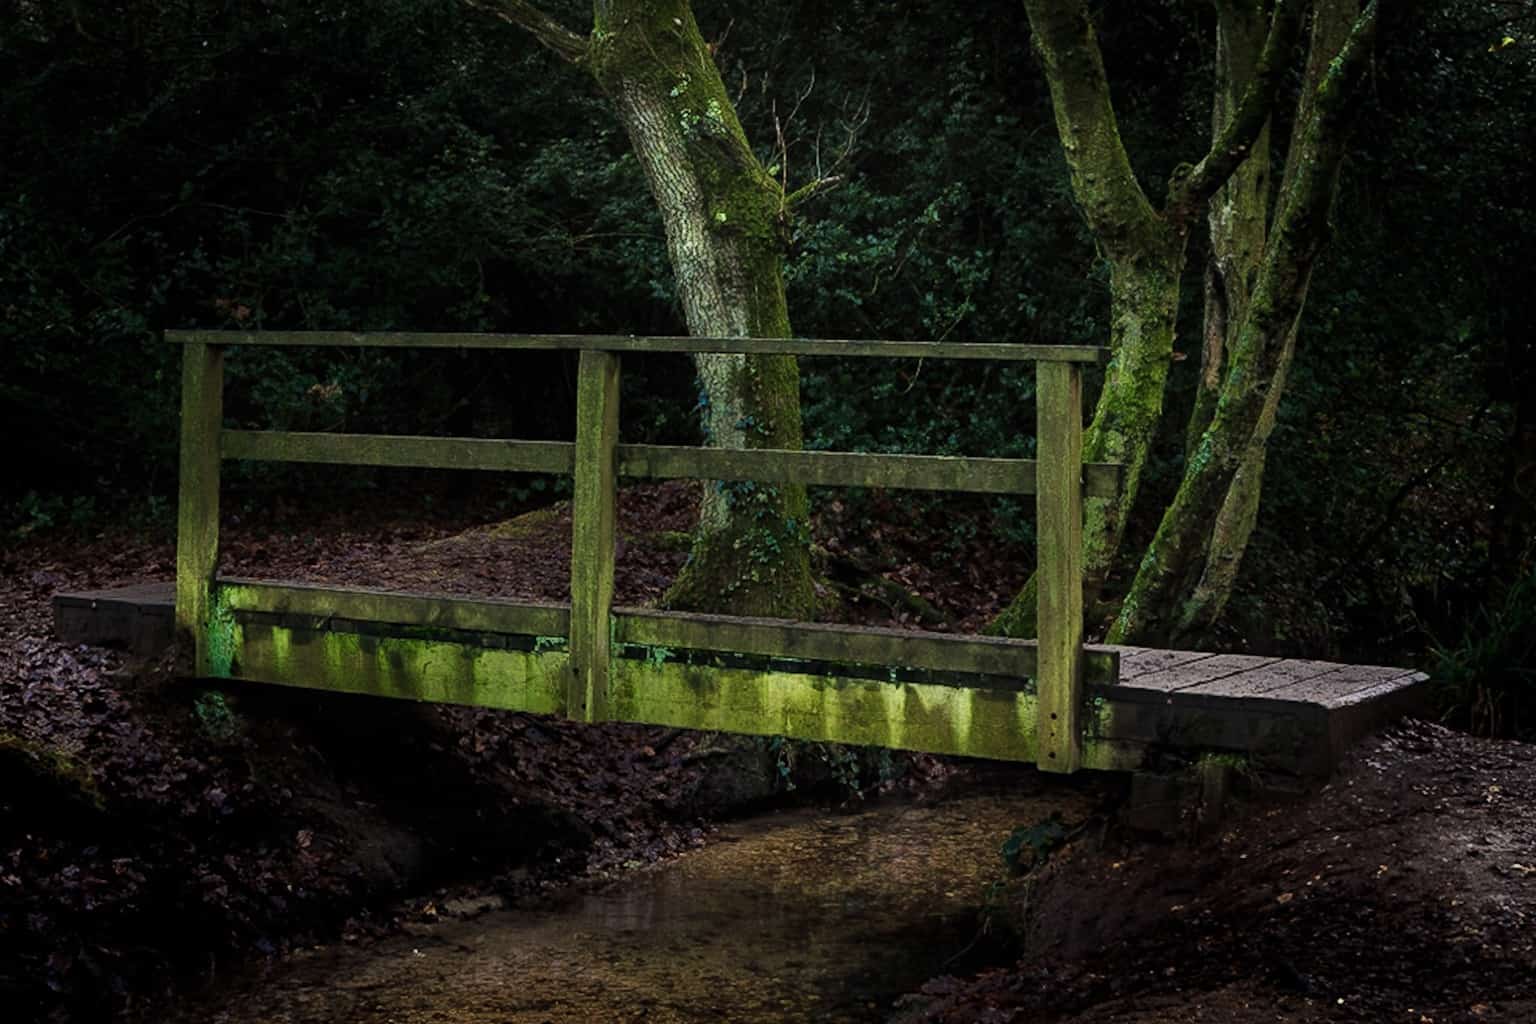  The crop of the picture of the footbridge in the woods in Dorset   